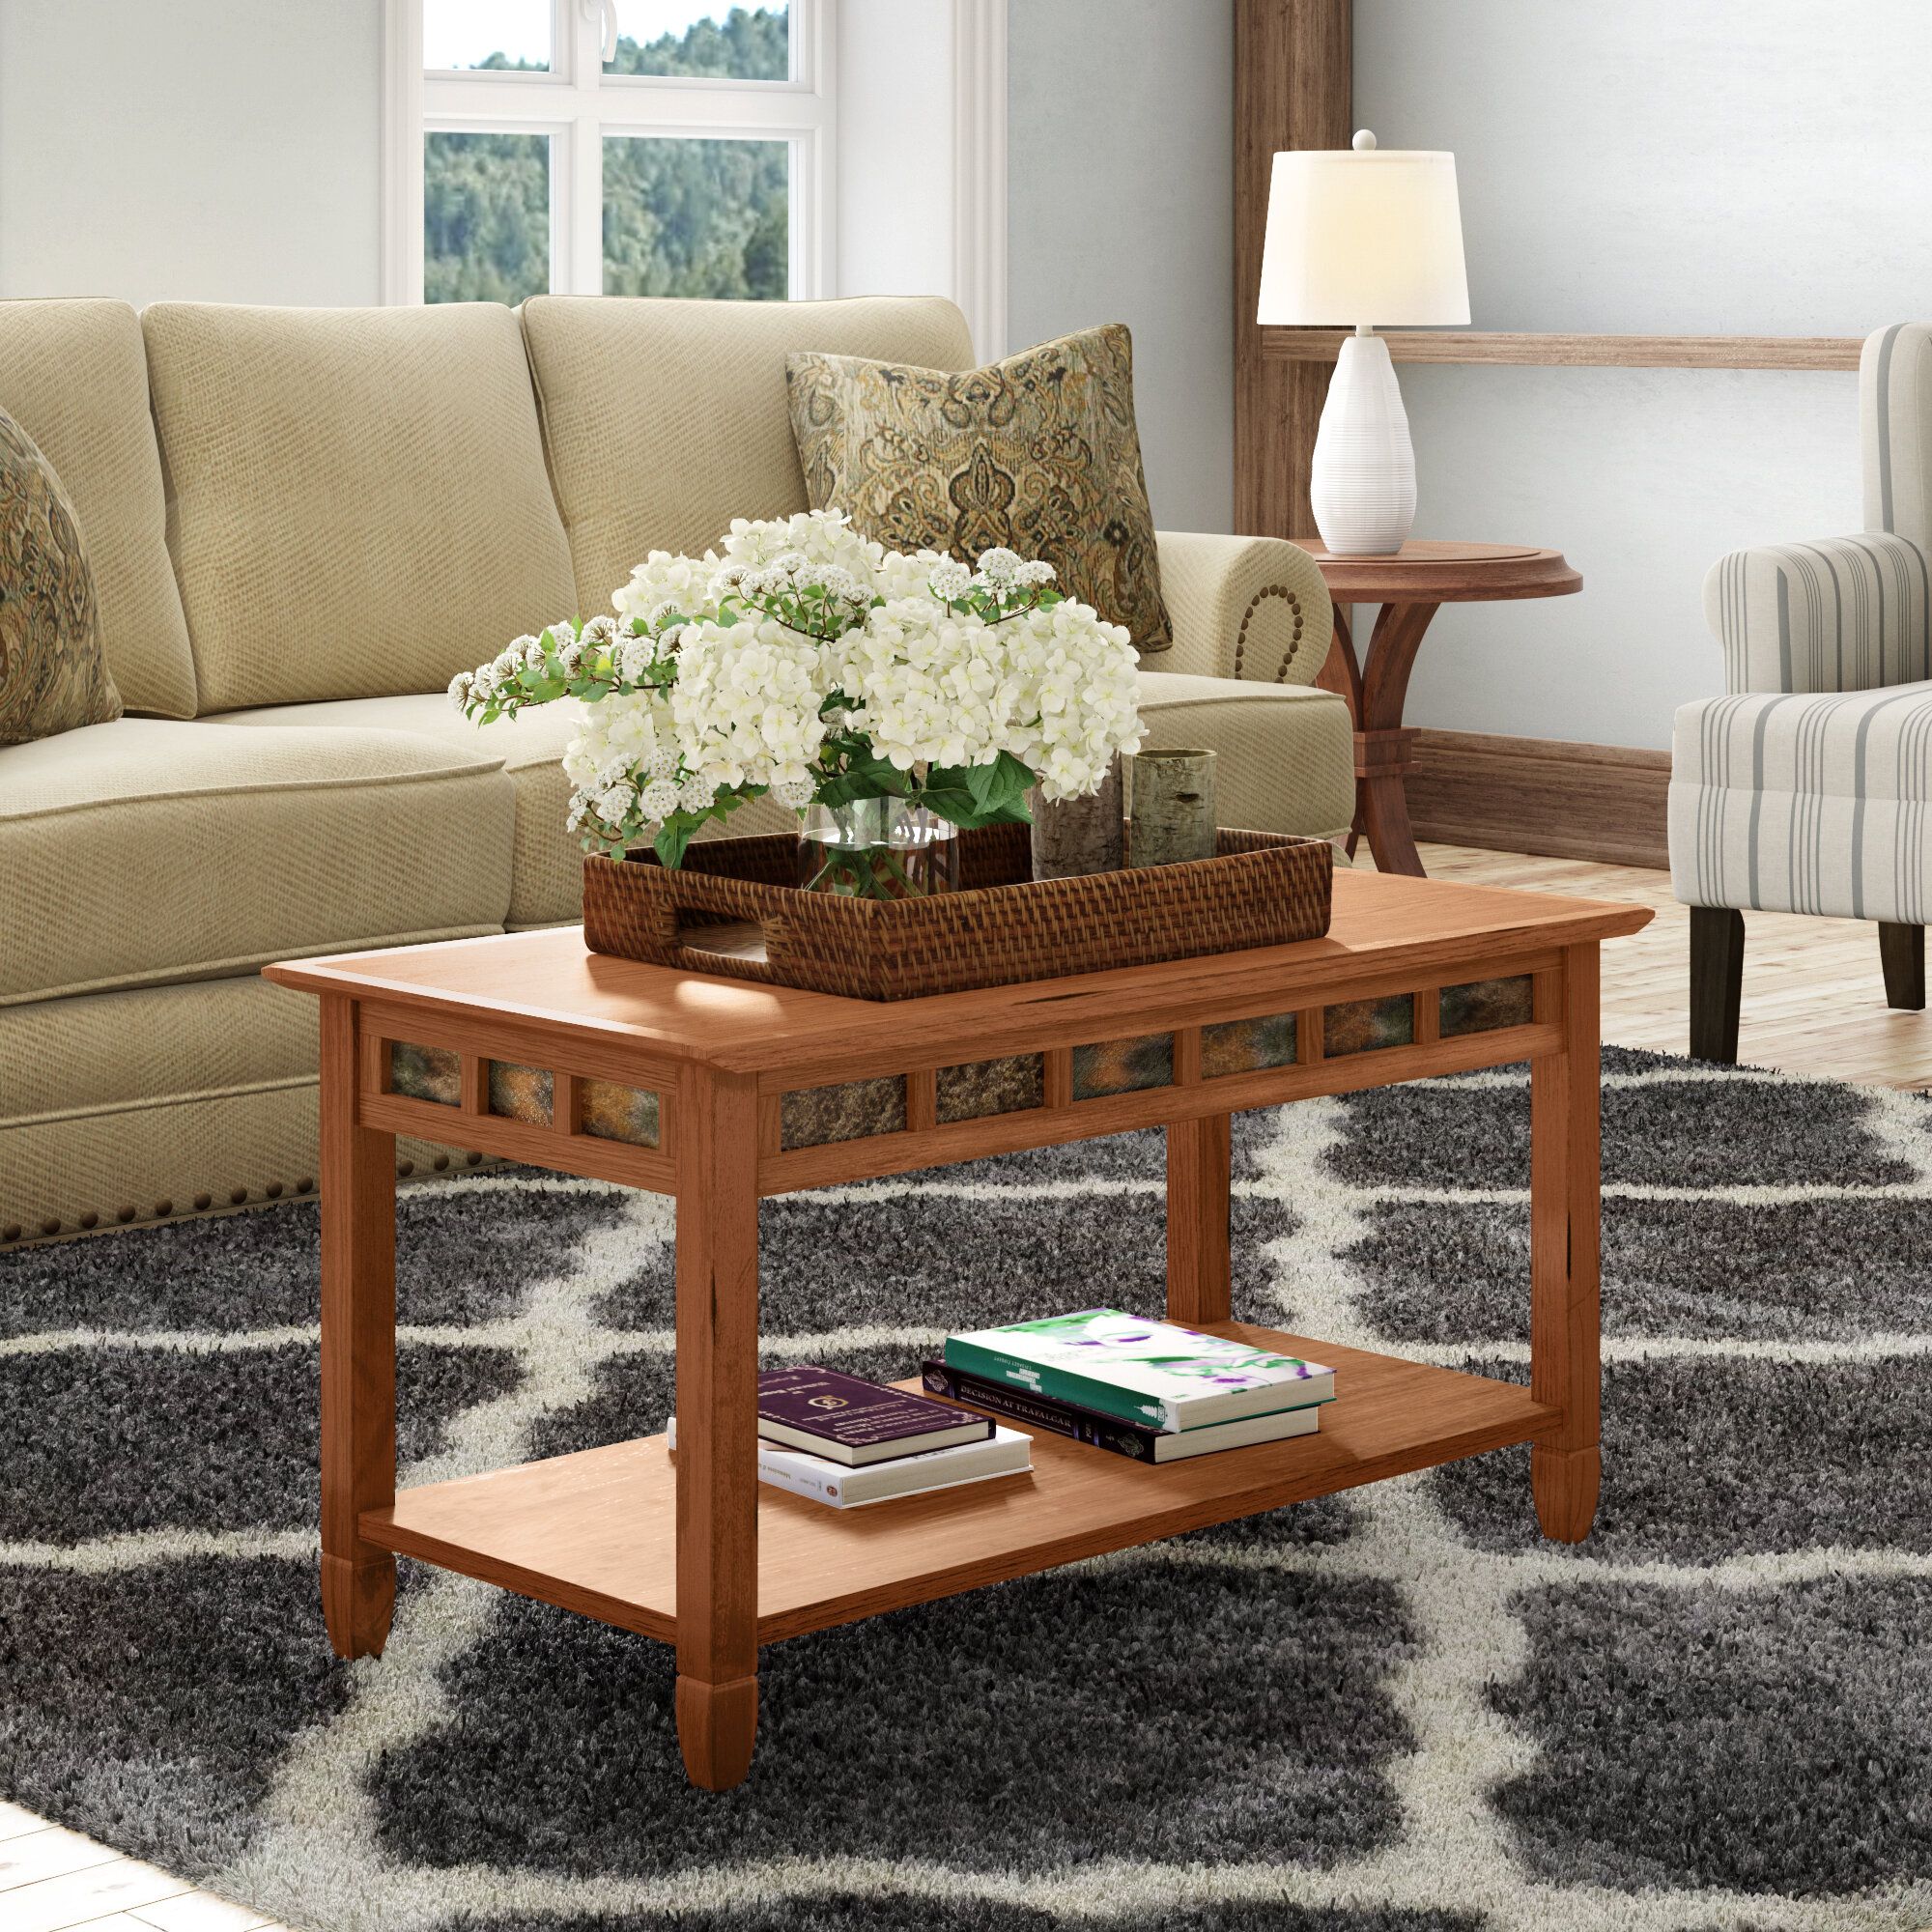 Charlton Home® Rustic Solid Wood Slate Coffee Table & Reviews | Wayfair Intended For Rustic Wood Coffee Tables (View 15 of 15)